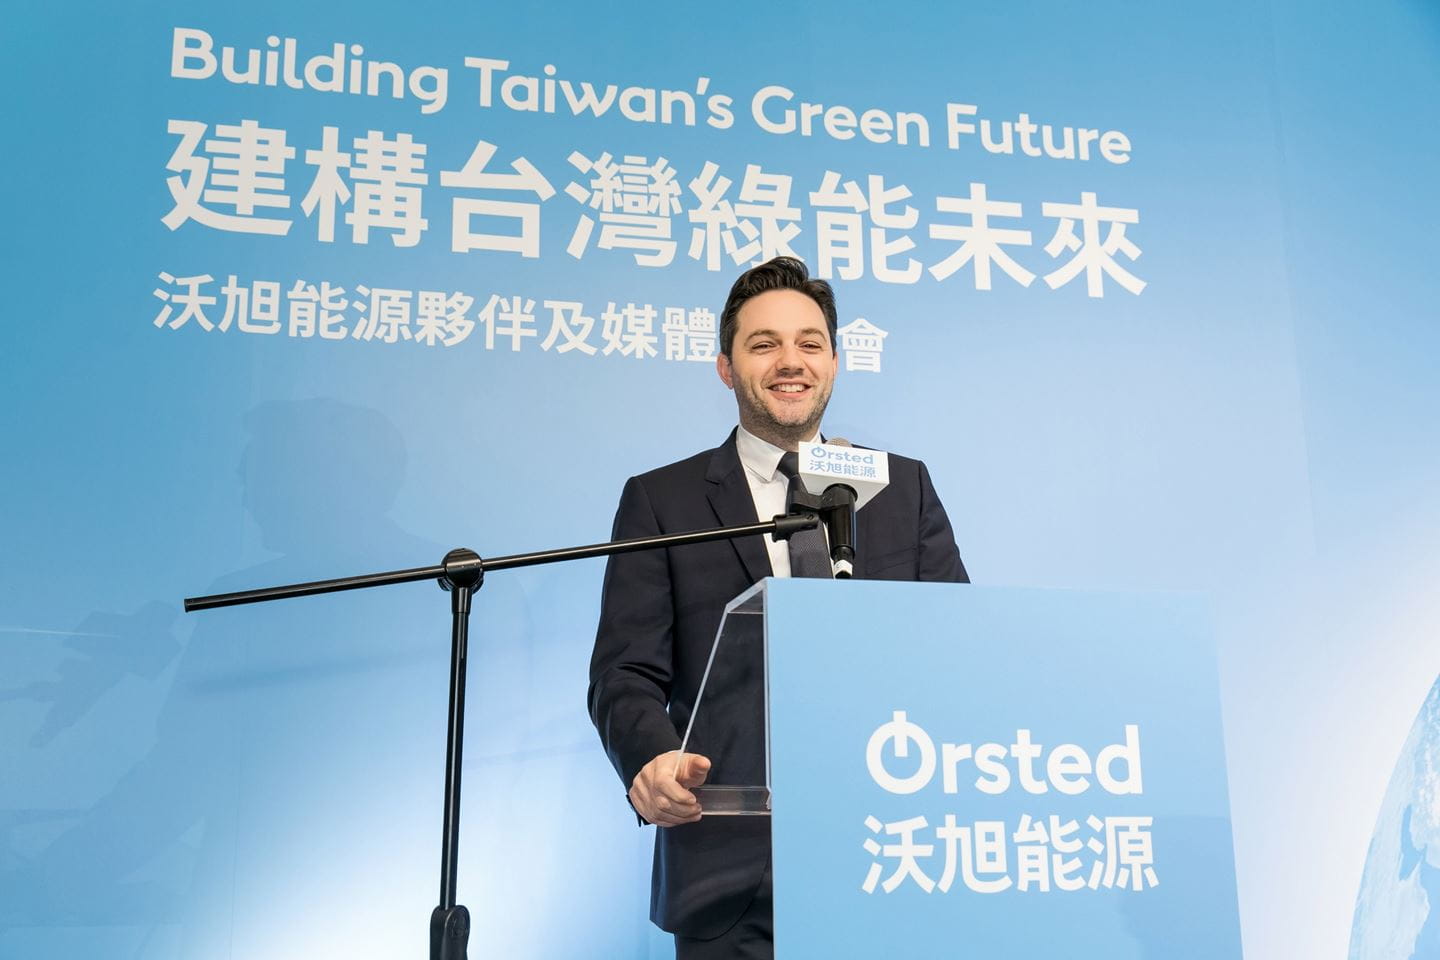 Ørsted is the first offshore wind developer signed a MoU with Changhua County.